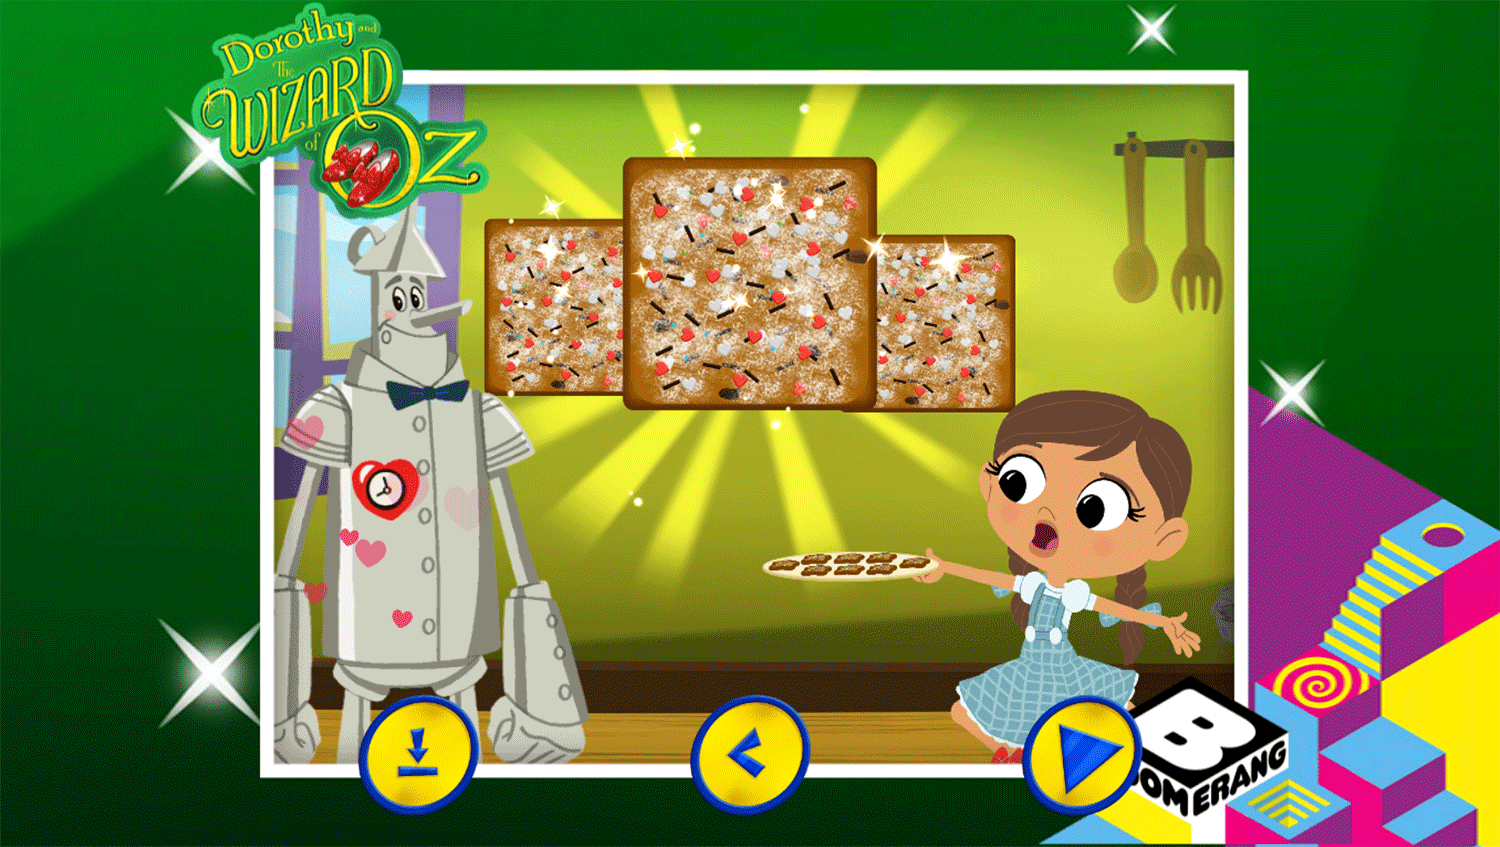 Dorothy and the Wizard of Oz Cookie Magic Game Final Image Screenshot.